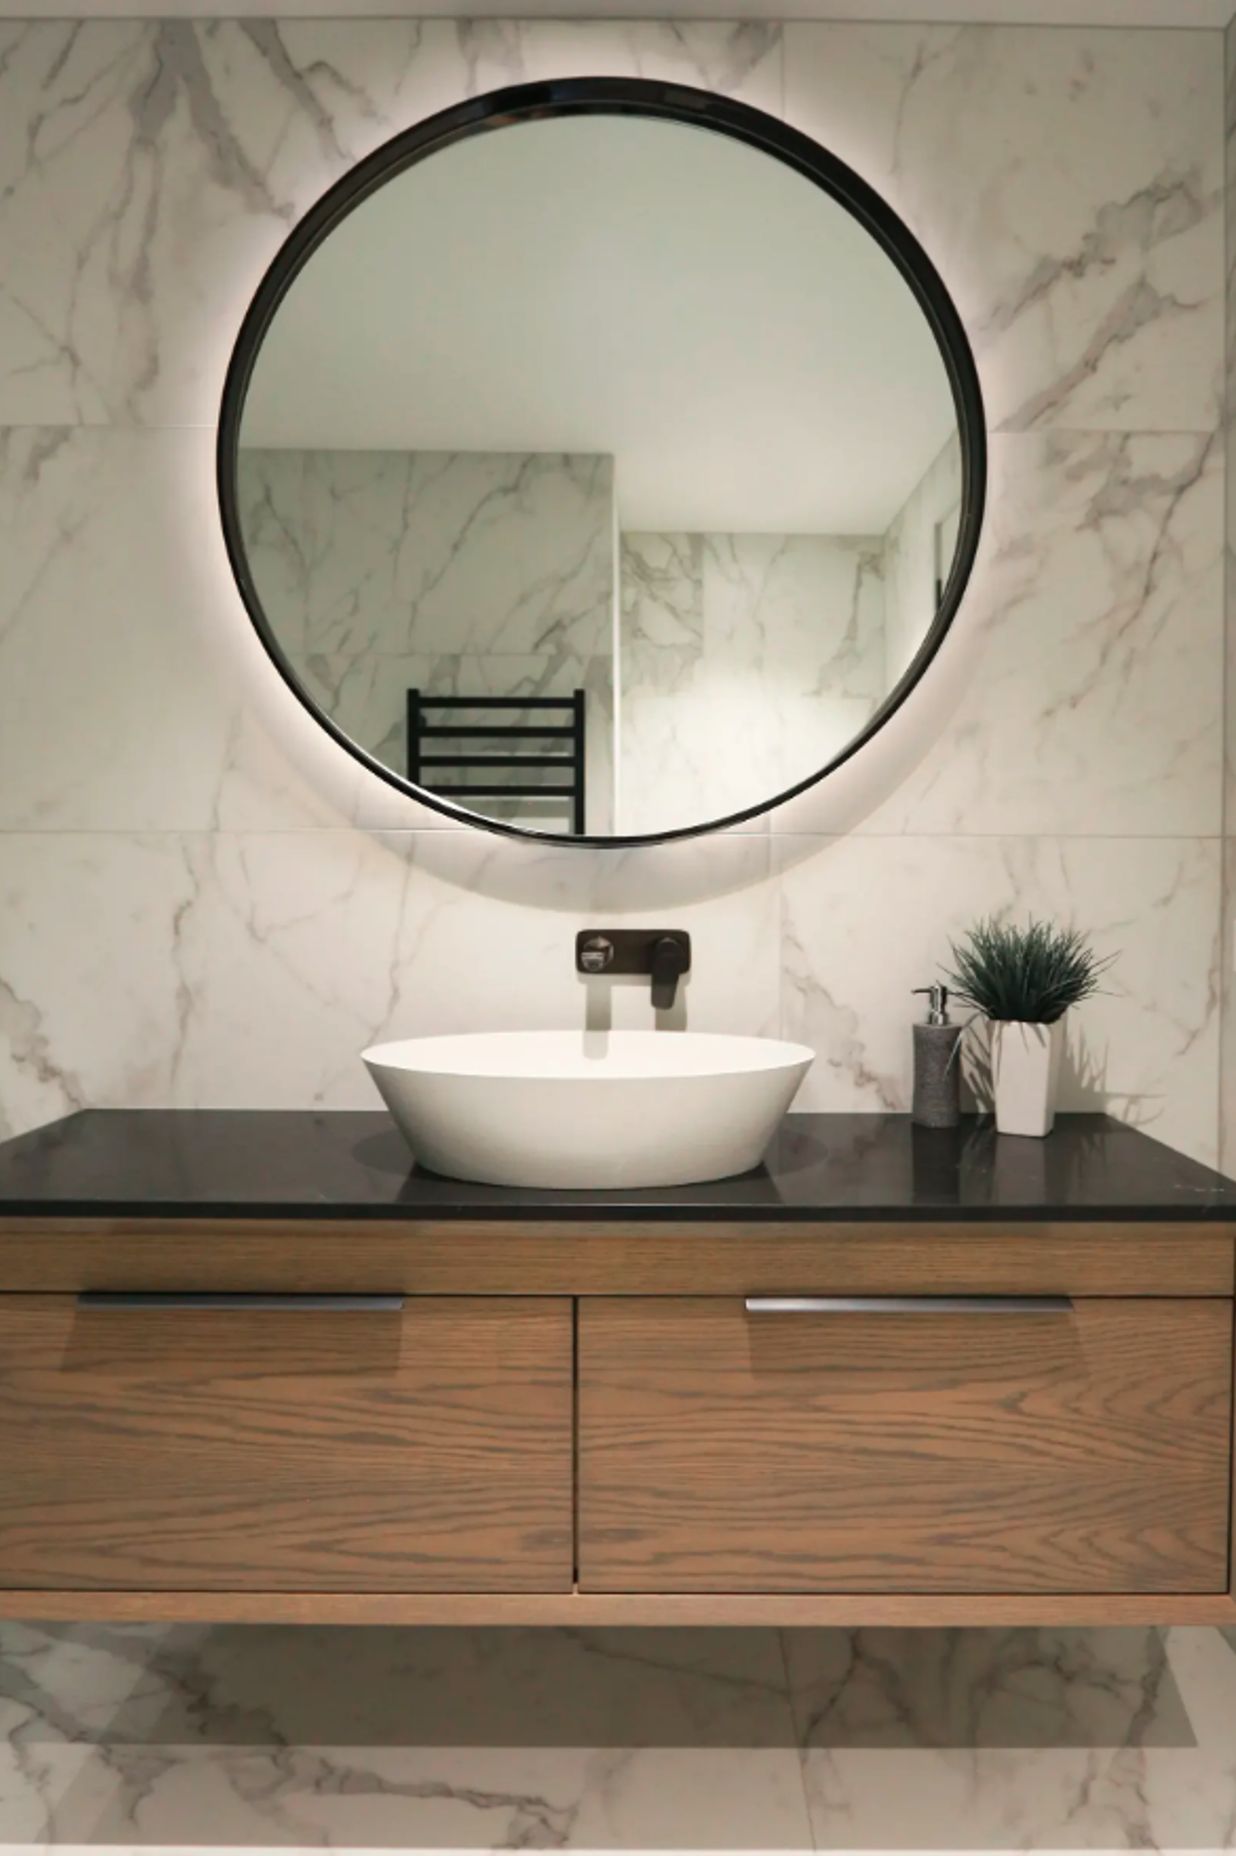 How to choose the right lighting for your bathroom vanity
